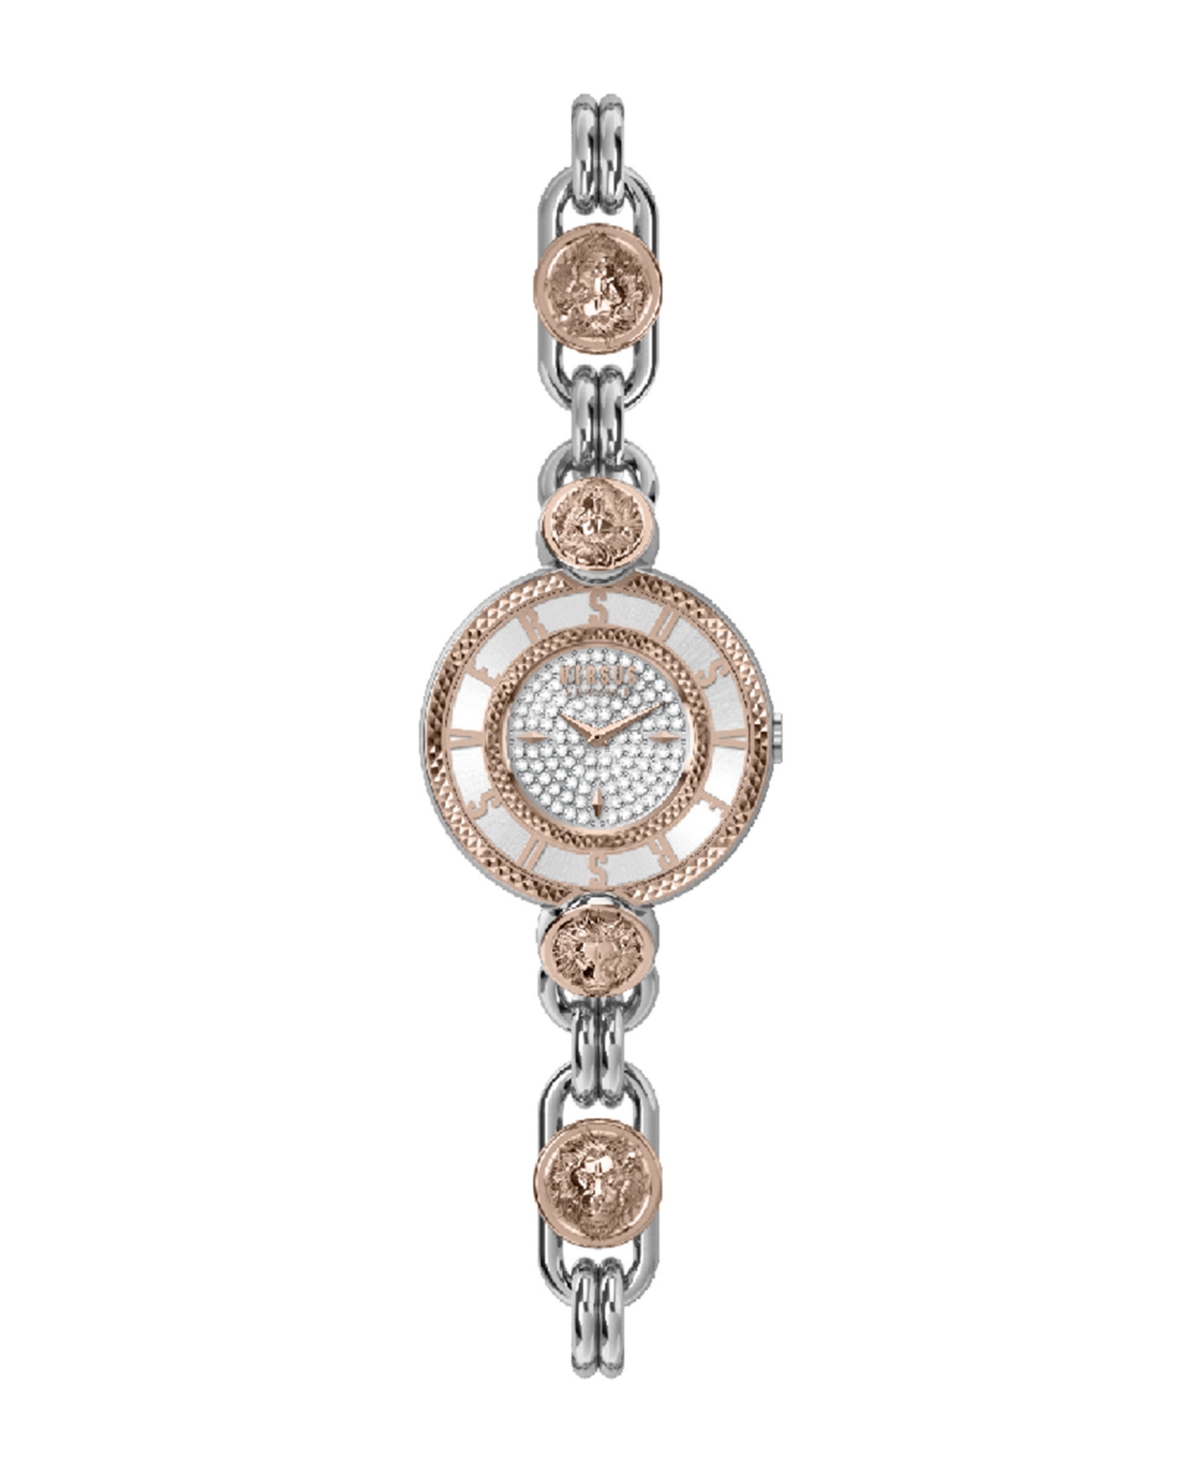 Women's Les Docks Petite 2 Hand Quartz Rose Two-Tone Stainless Steel Watch, 30mm - Two Tone